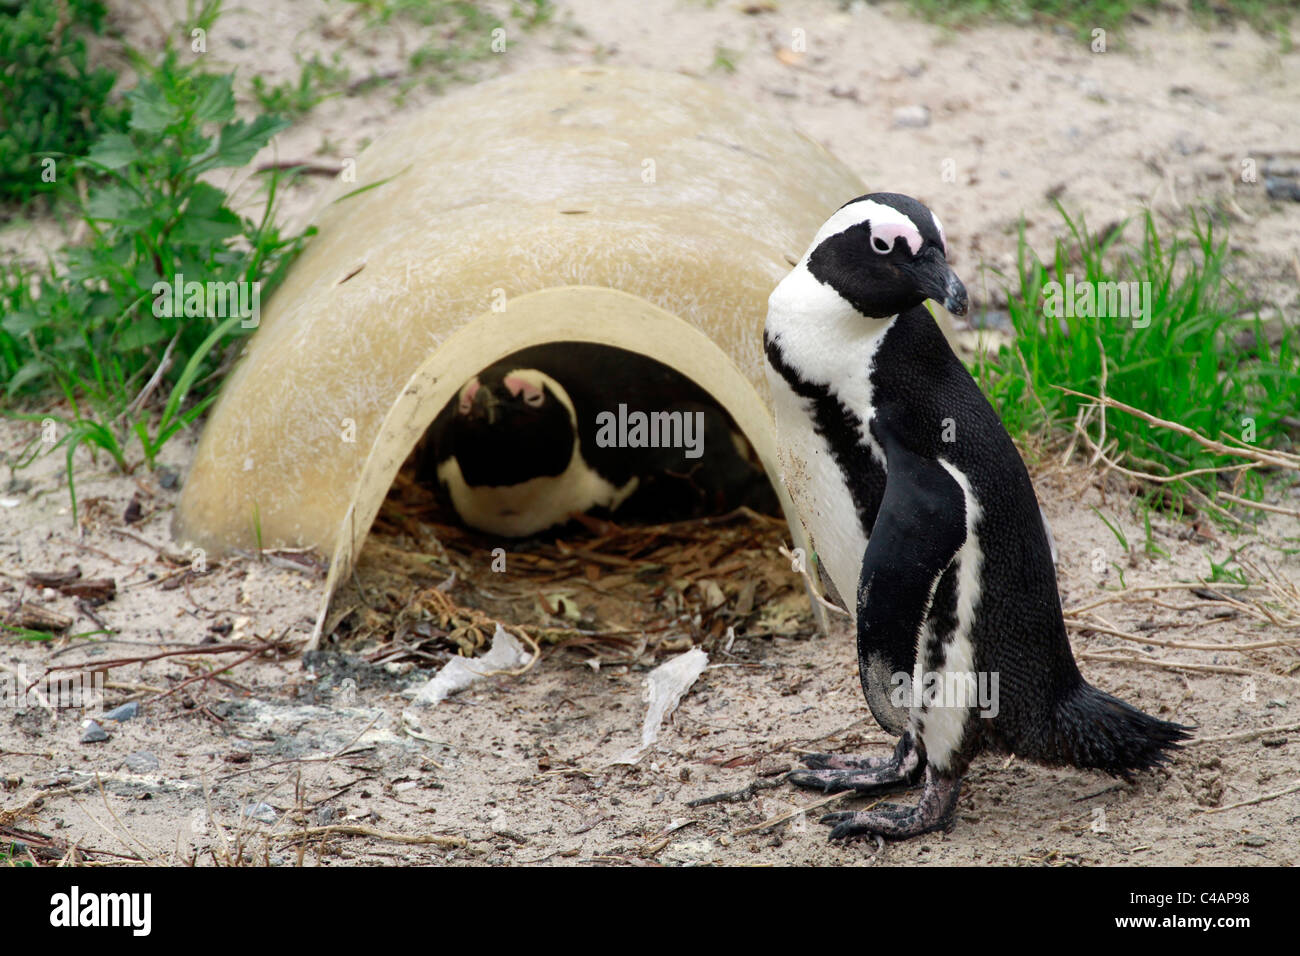 African Penguin(Spheniscus demersus) sitting on an egg in its nest at Boulders Beach  Penguin Colony, Simon's Town, South Africa. Stock Photo